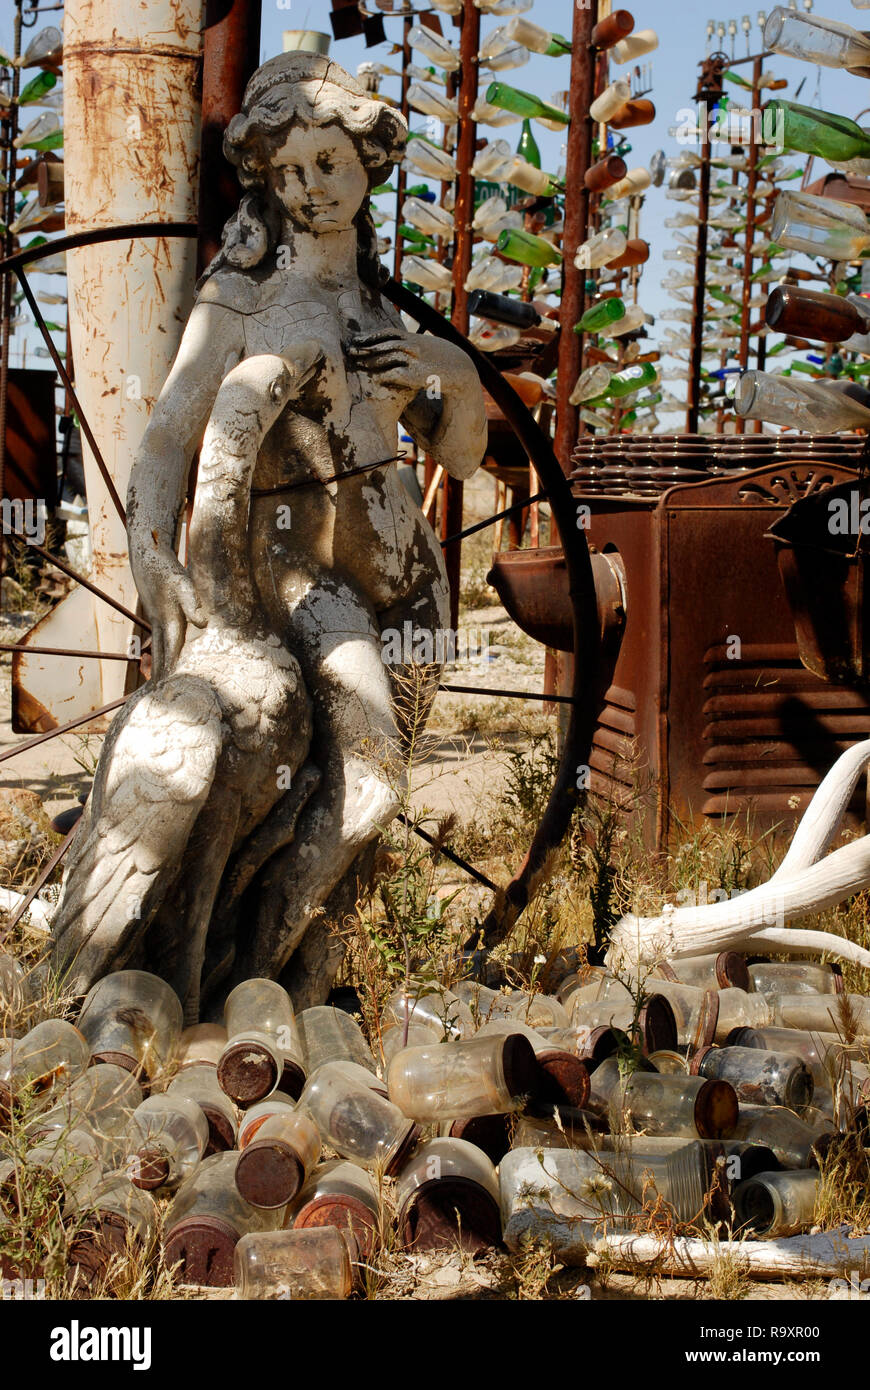 A sculpture and other objects at Bottle Tree Ranch, a popular roadside art installation created by Elmer Long on Route 66 in Oro Grande, California. Stock Photo